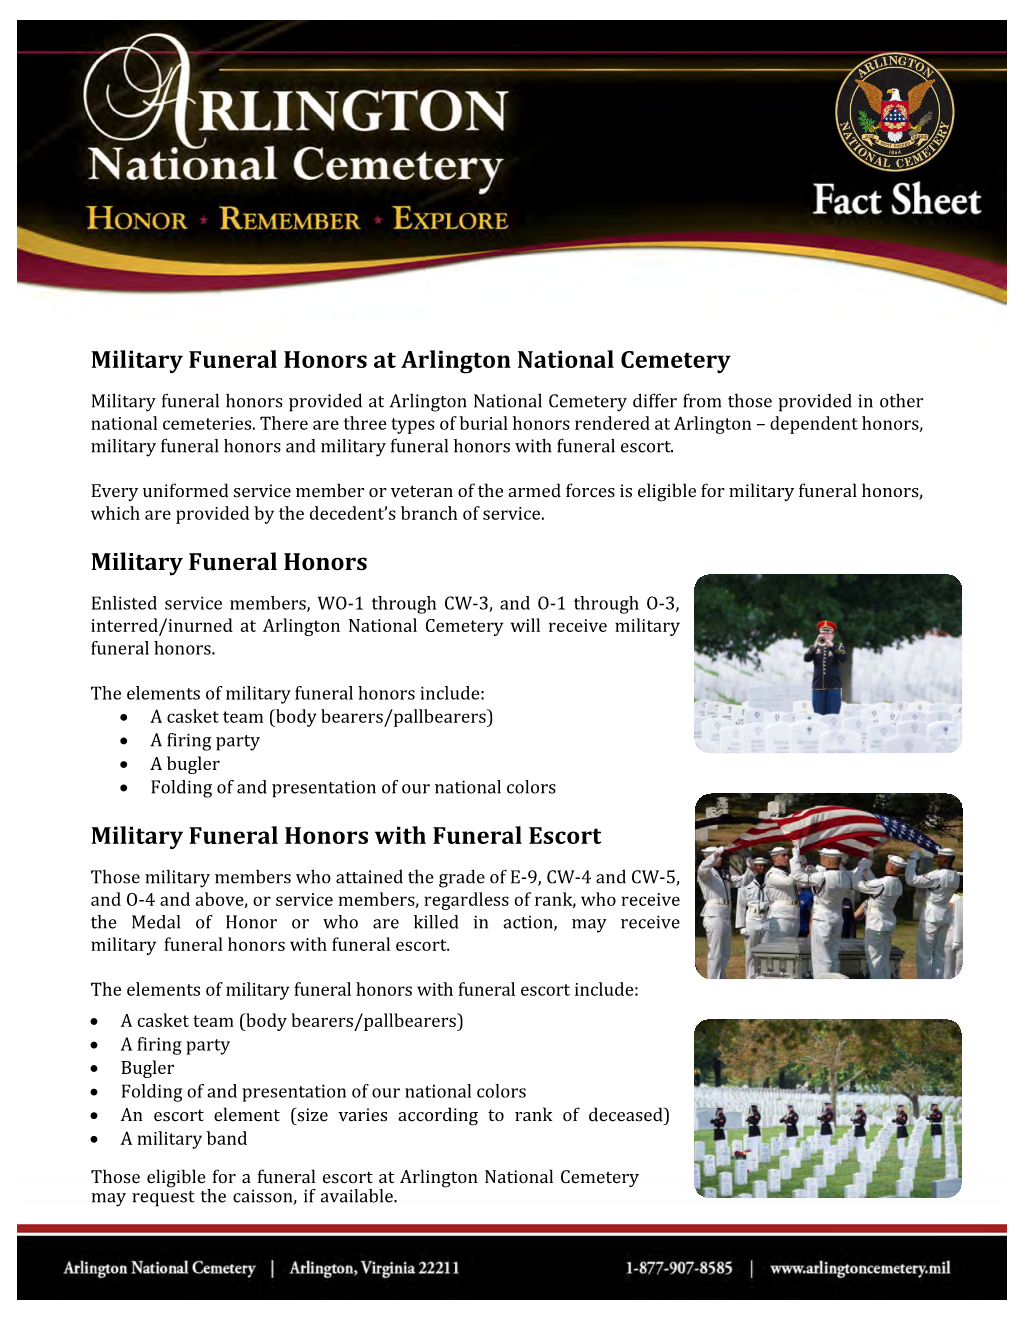 Military Funeral Honors at Arlington National Cemetery Military Funeral